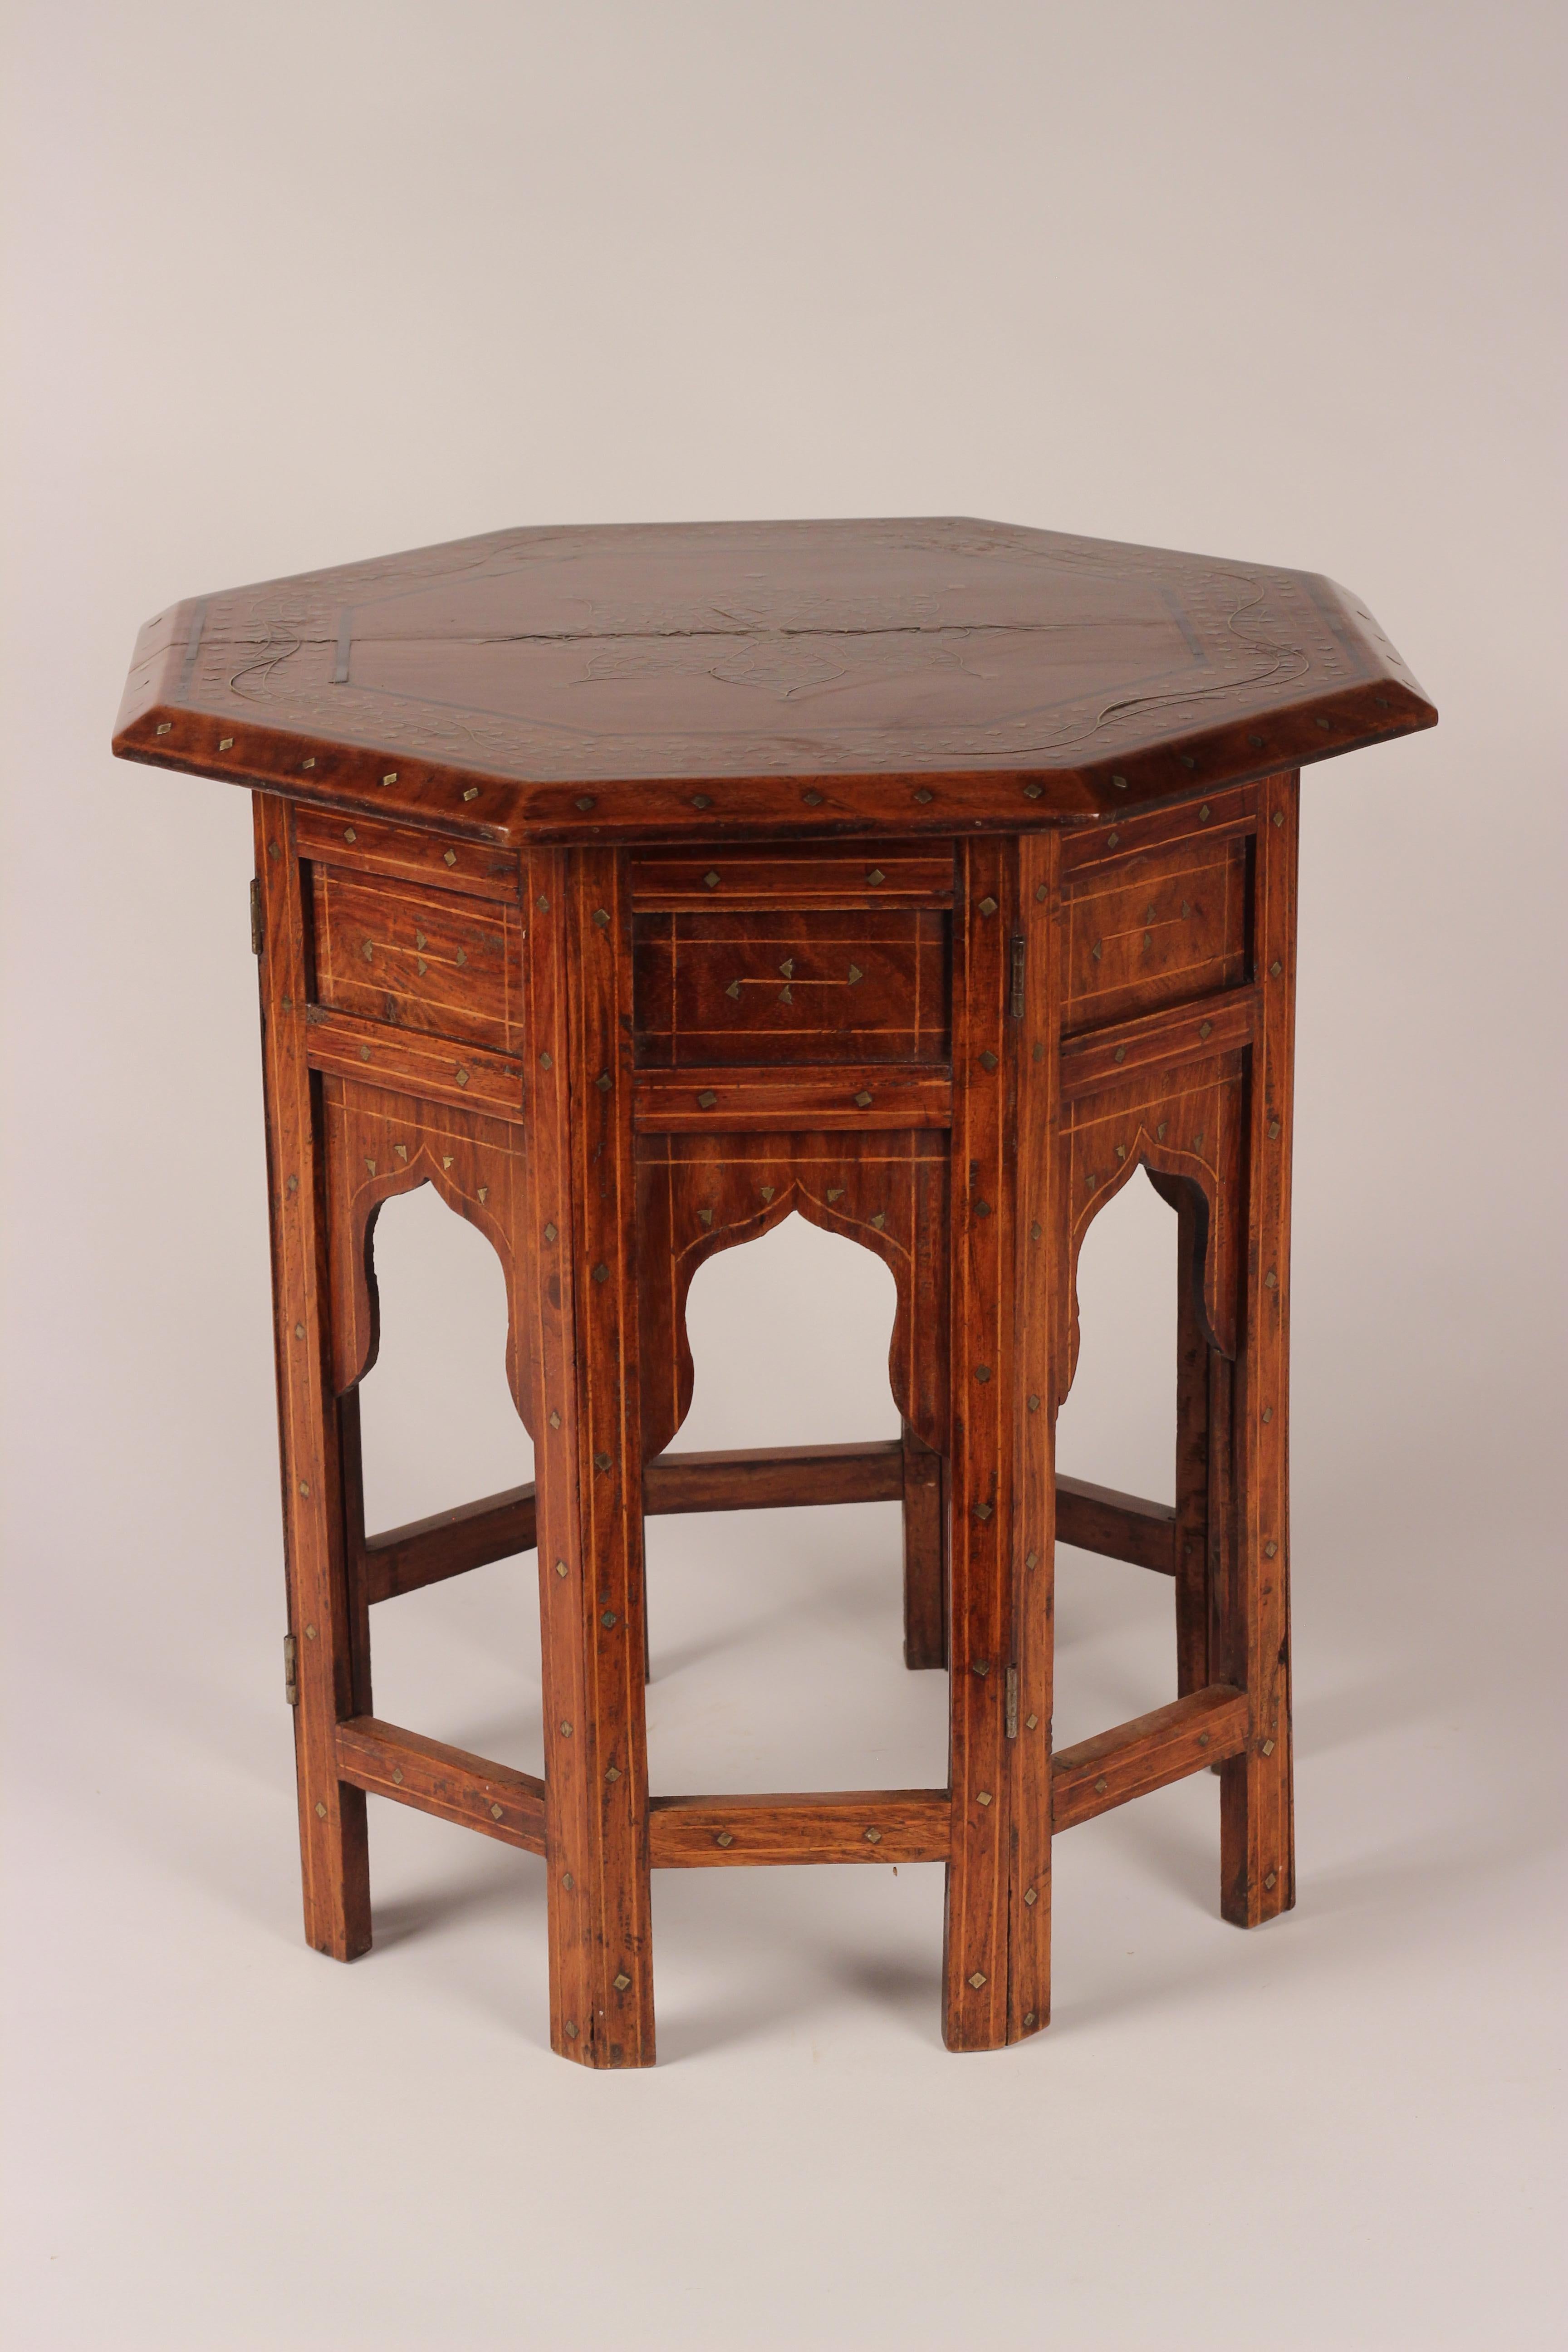 Boho Chic Style Anglo Indian Bombay Rosewood and Brass Inlay Octagonal Table For Sale 4